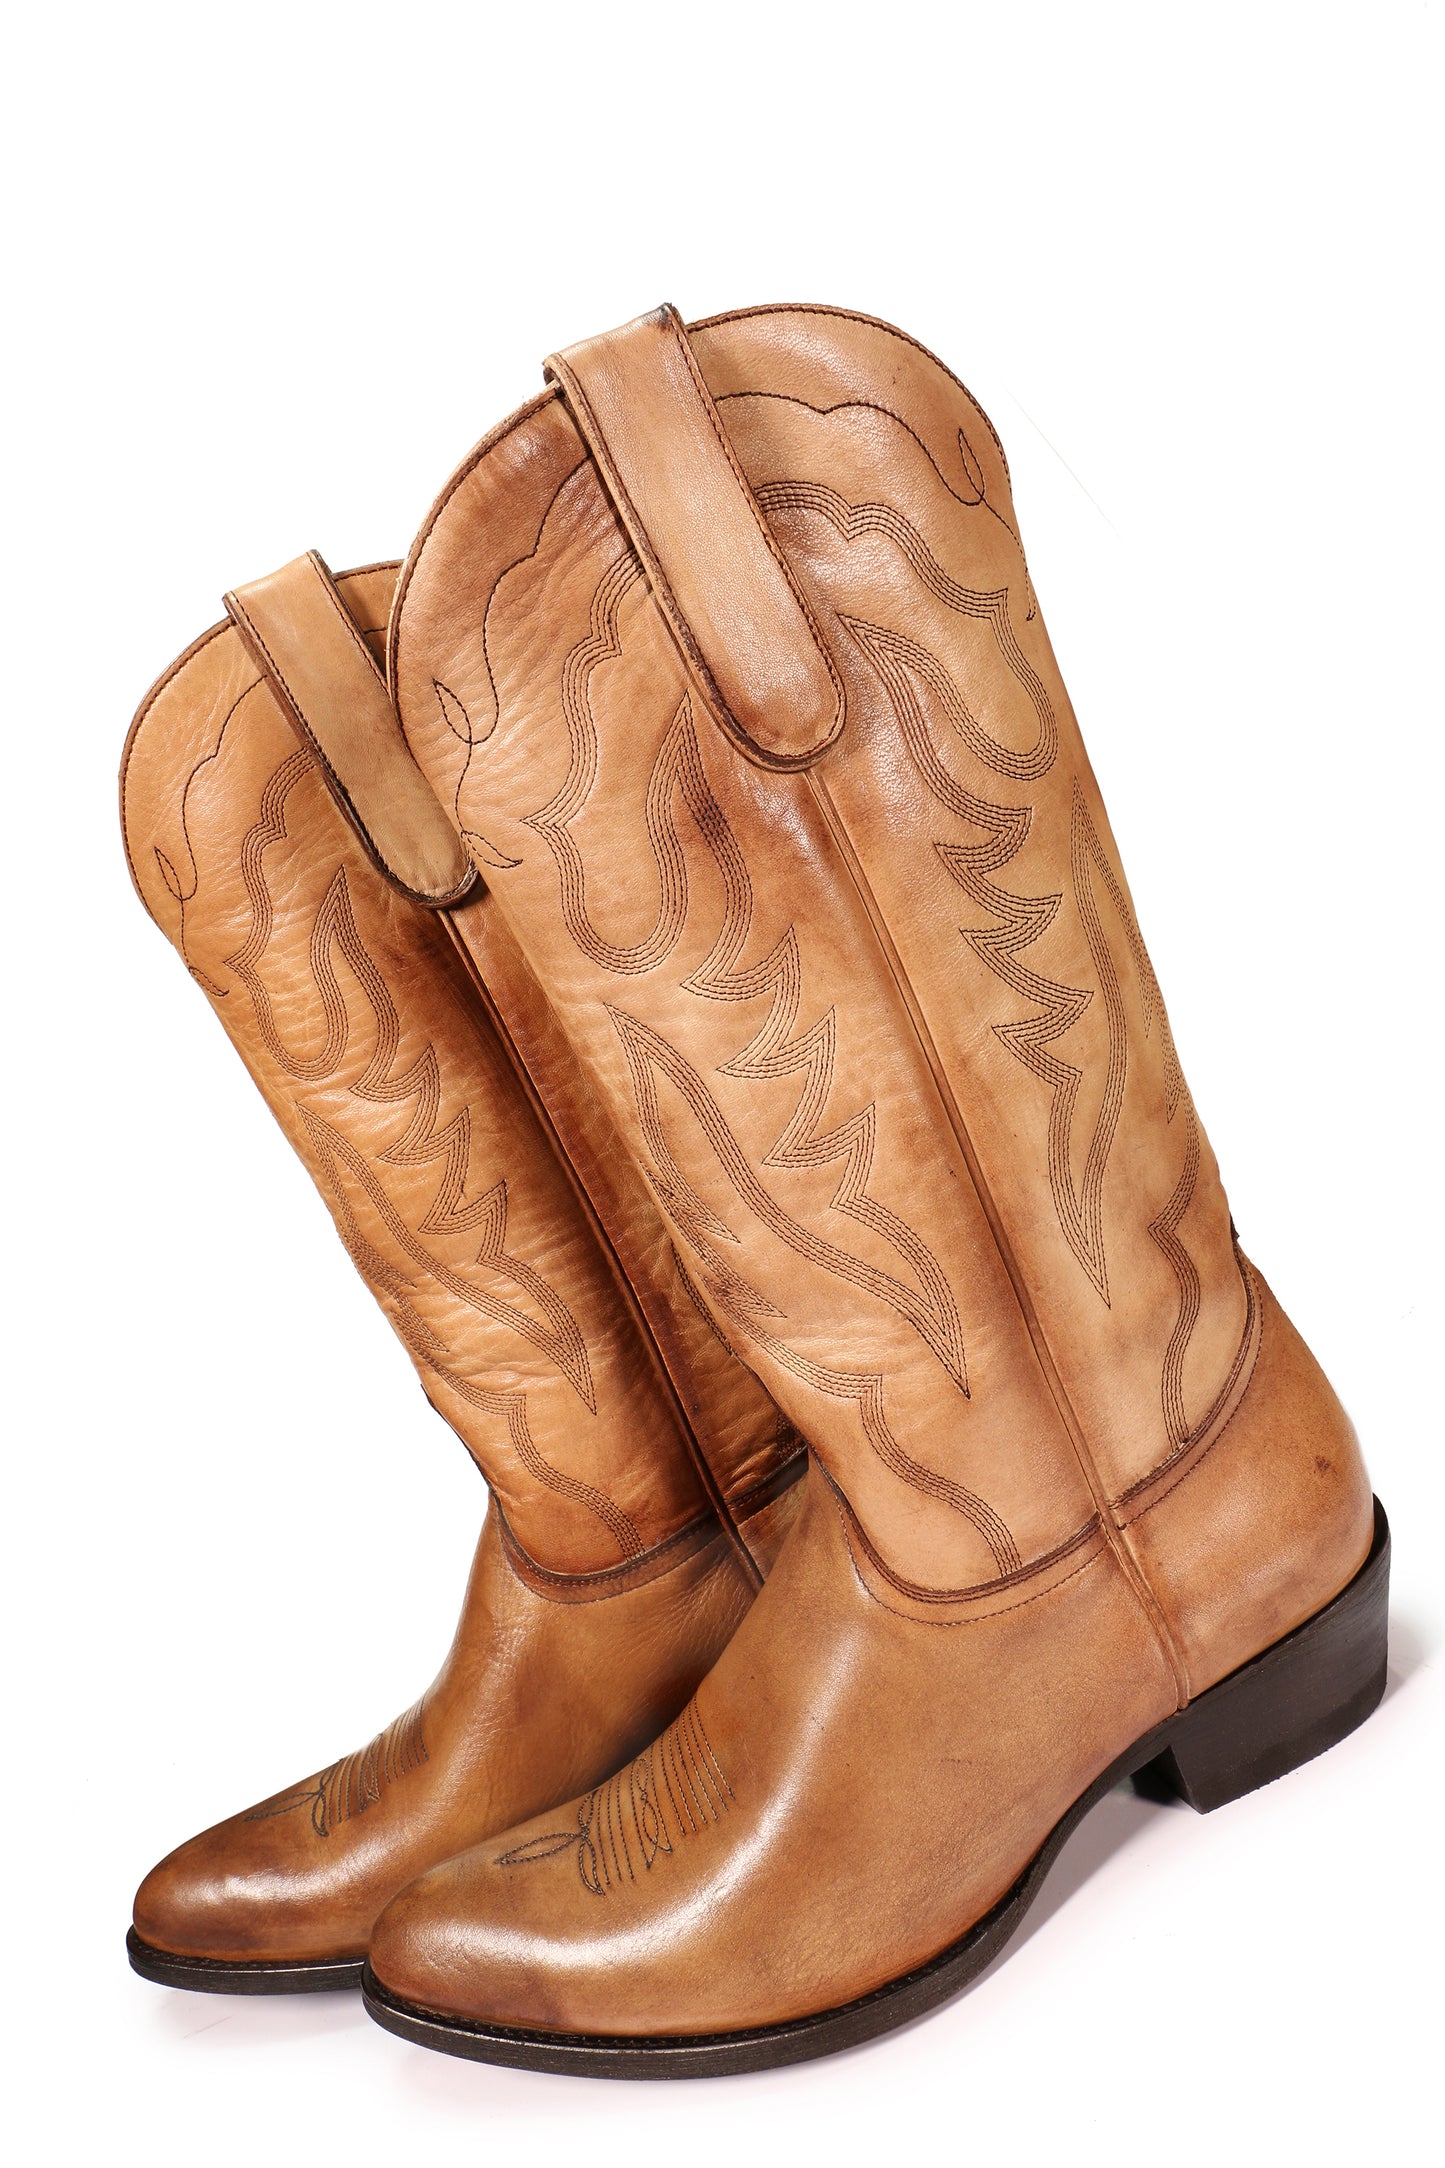 NOCL001-1 Old Boot Factory Women's BROOKSHIRE Beige Round Toe Boot